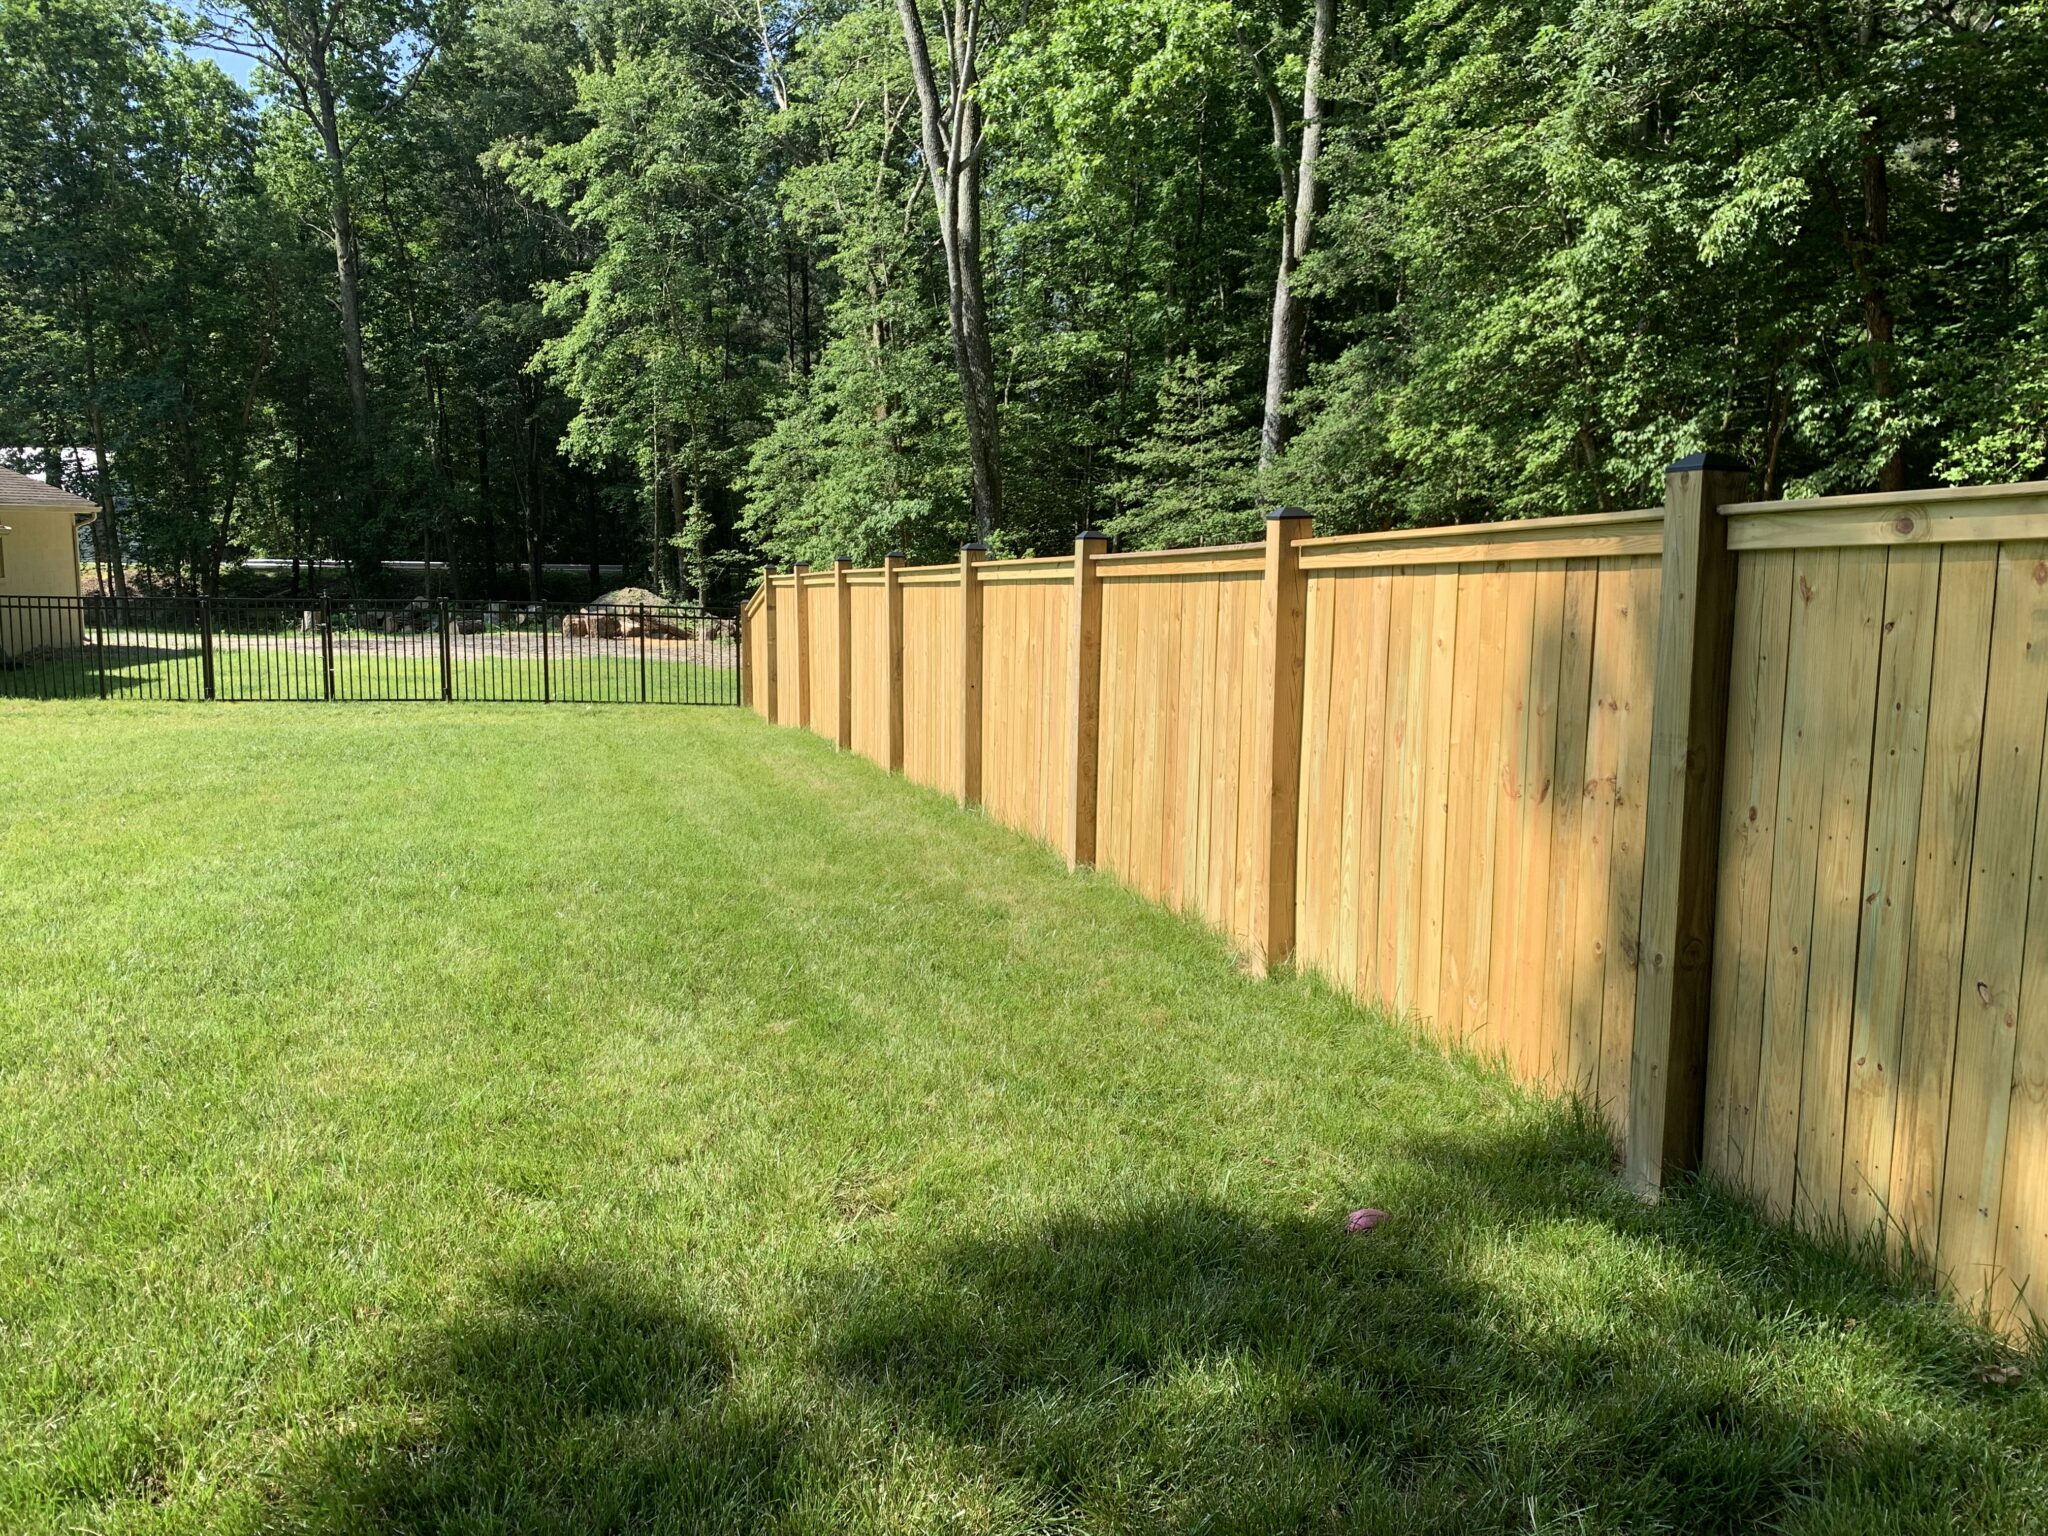 Top cap and finish board wood privacy fence tied to aluminum fencing